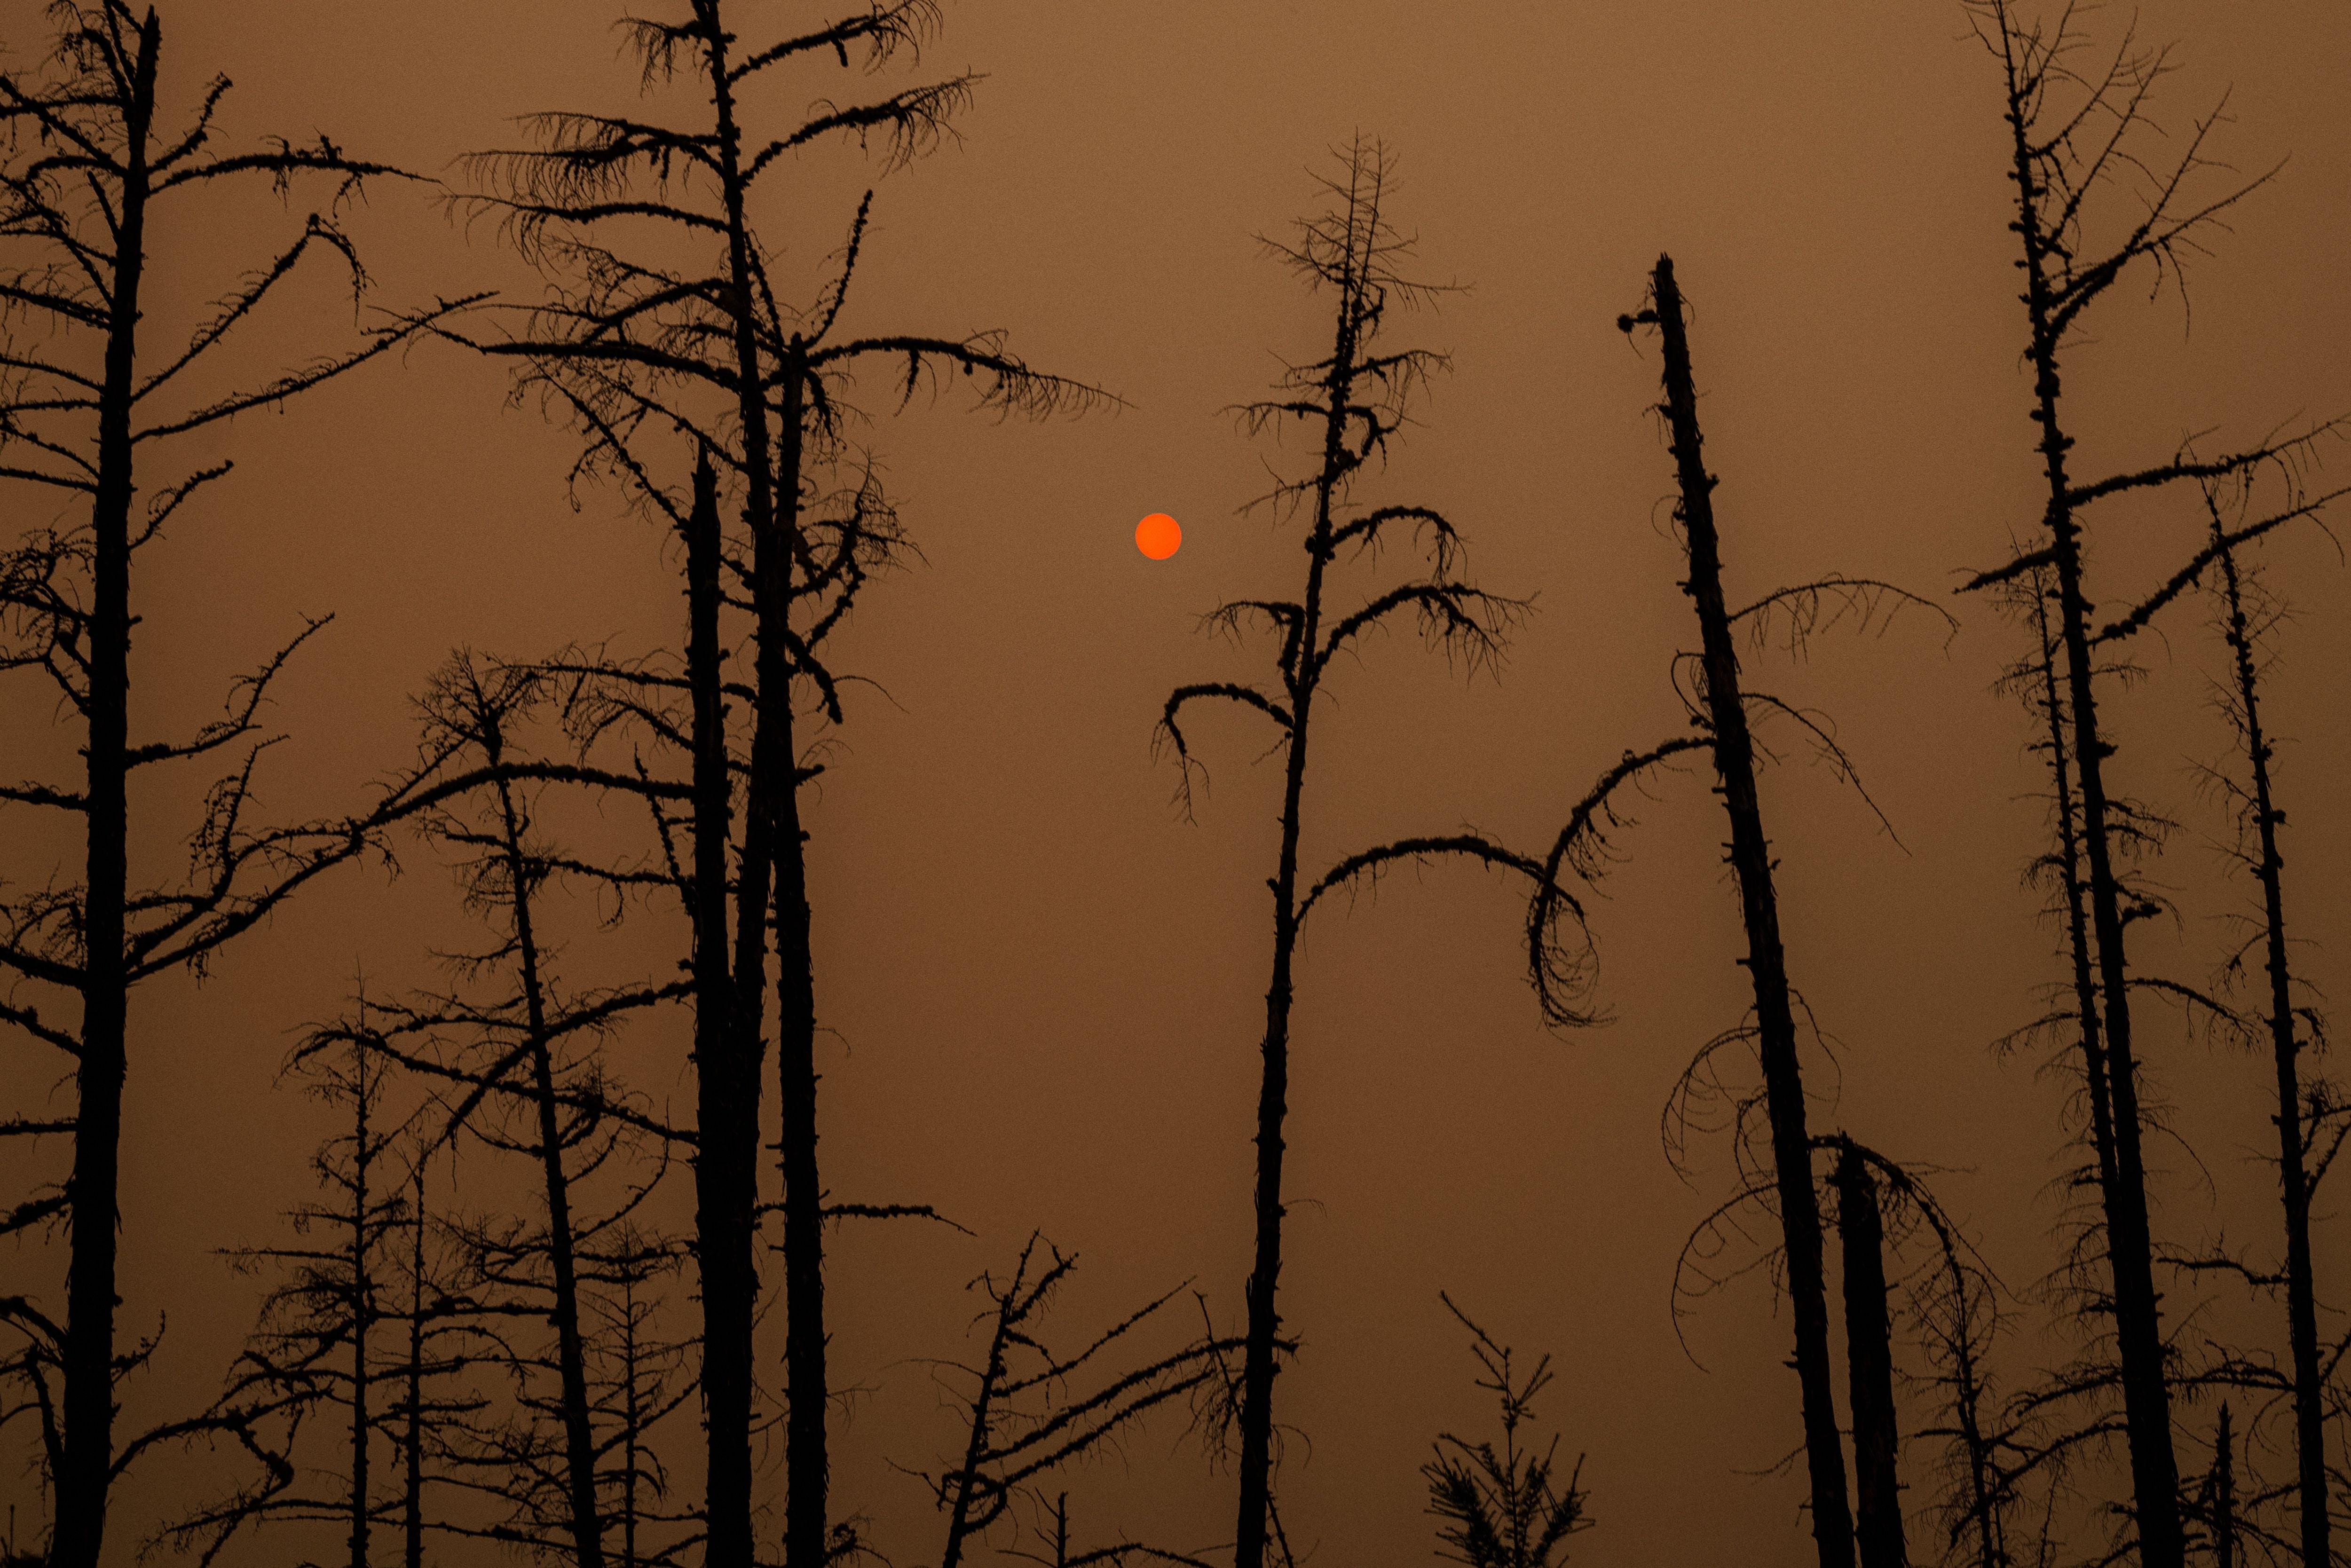 Forest fires near the village of Magaras in the republic of Sakha, Siberia in July 2021